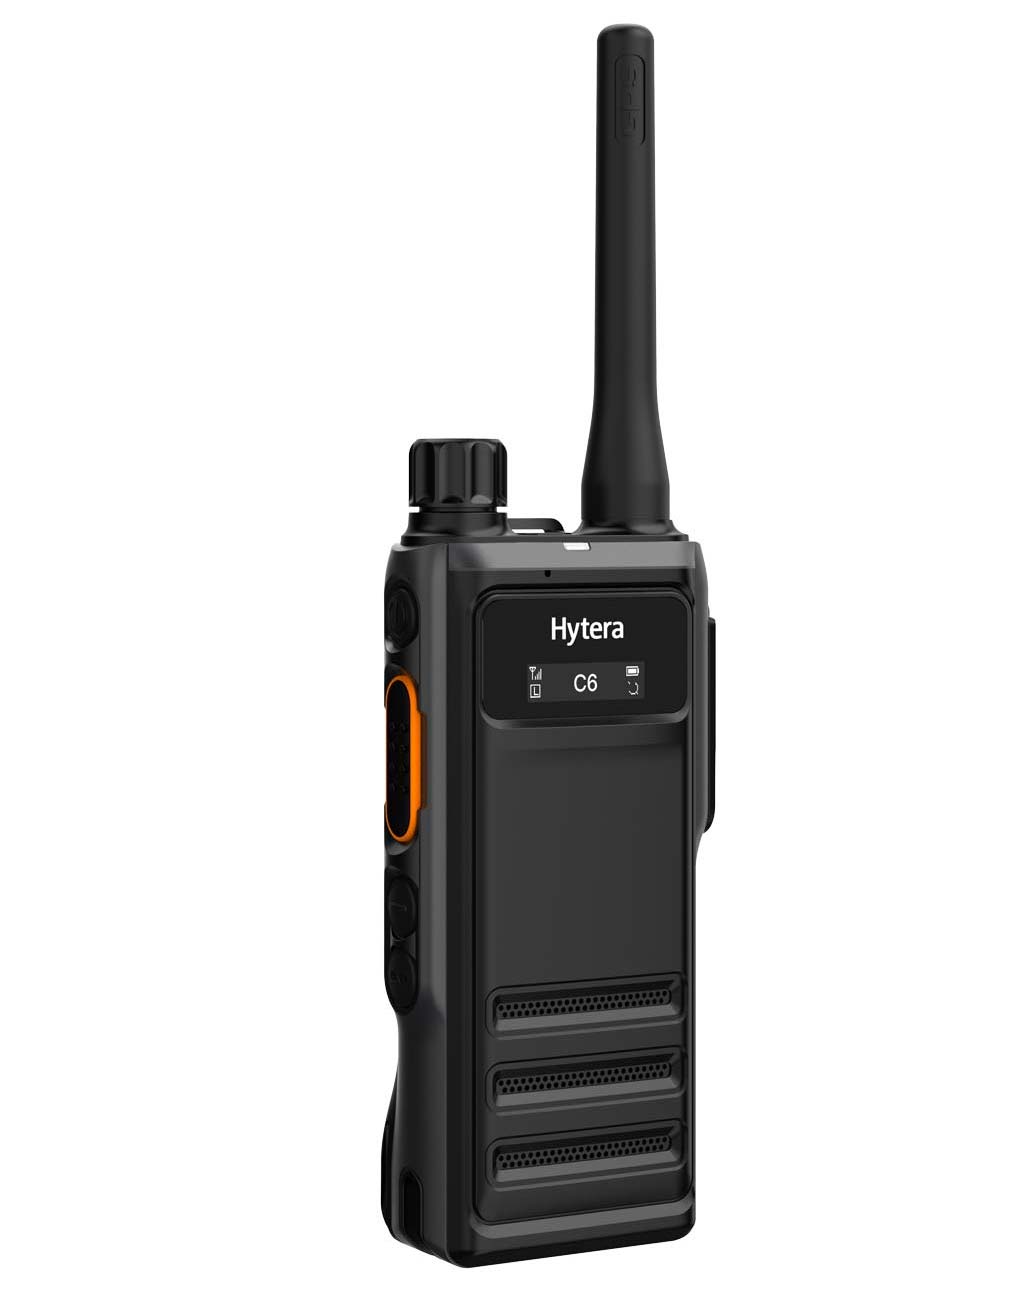 Hytera HP605 Two-Way Radio UHF 400-527 MHz GPS Bluetooth P67 without accessories DMR & analogue HP605G BT Um